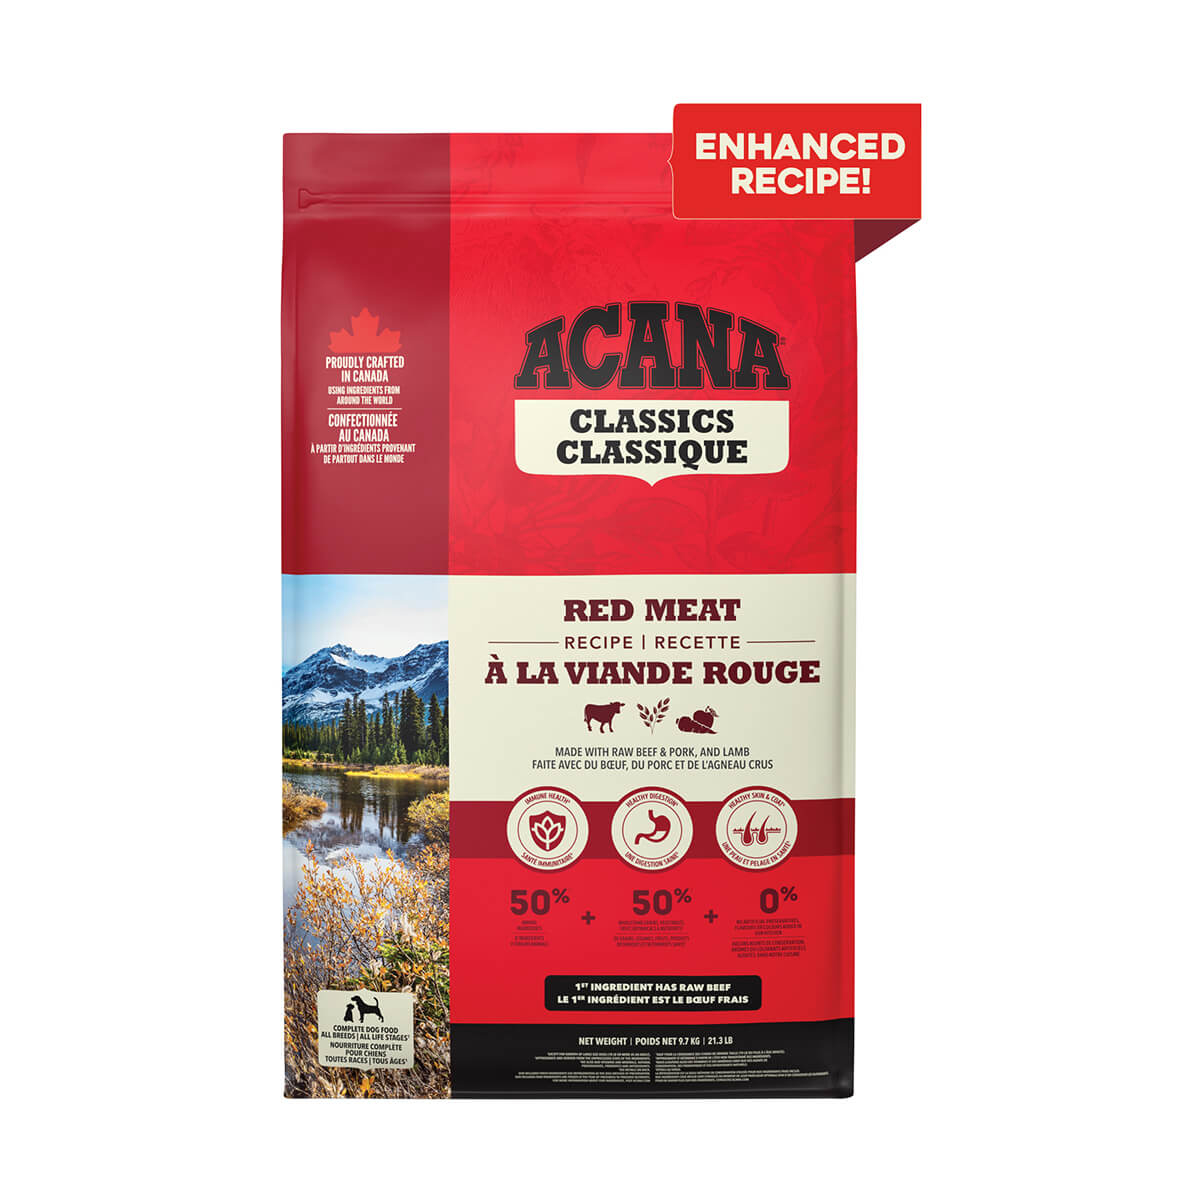 Acana Classic Red Meat Dog Food - 14.5 kg